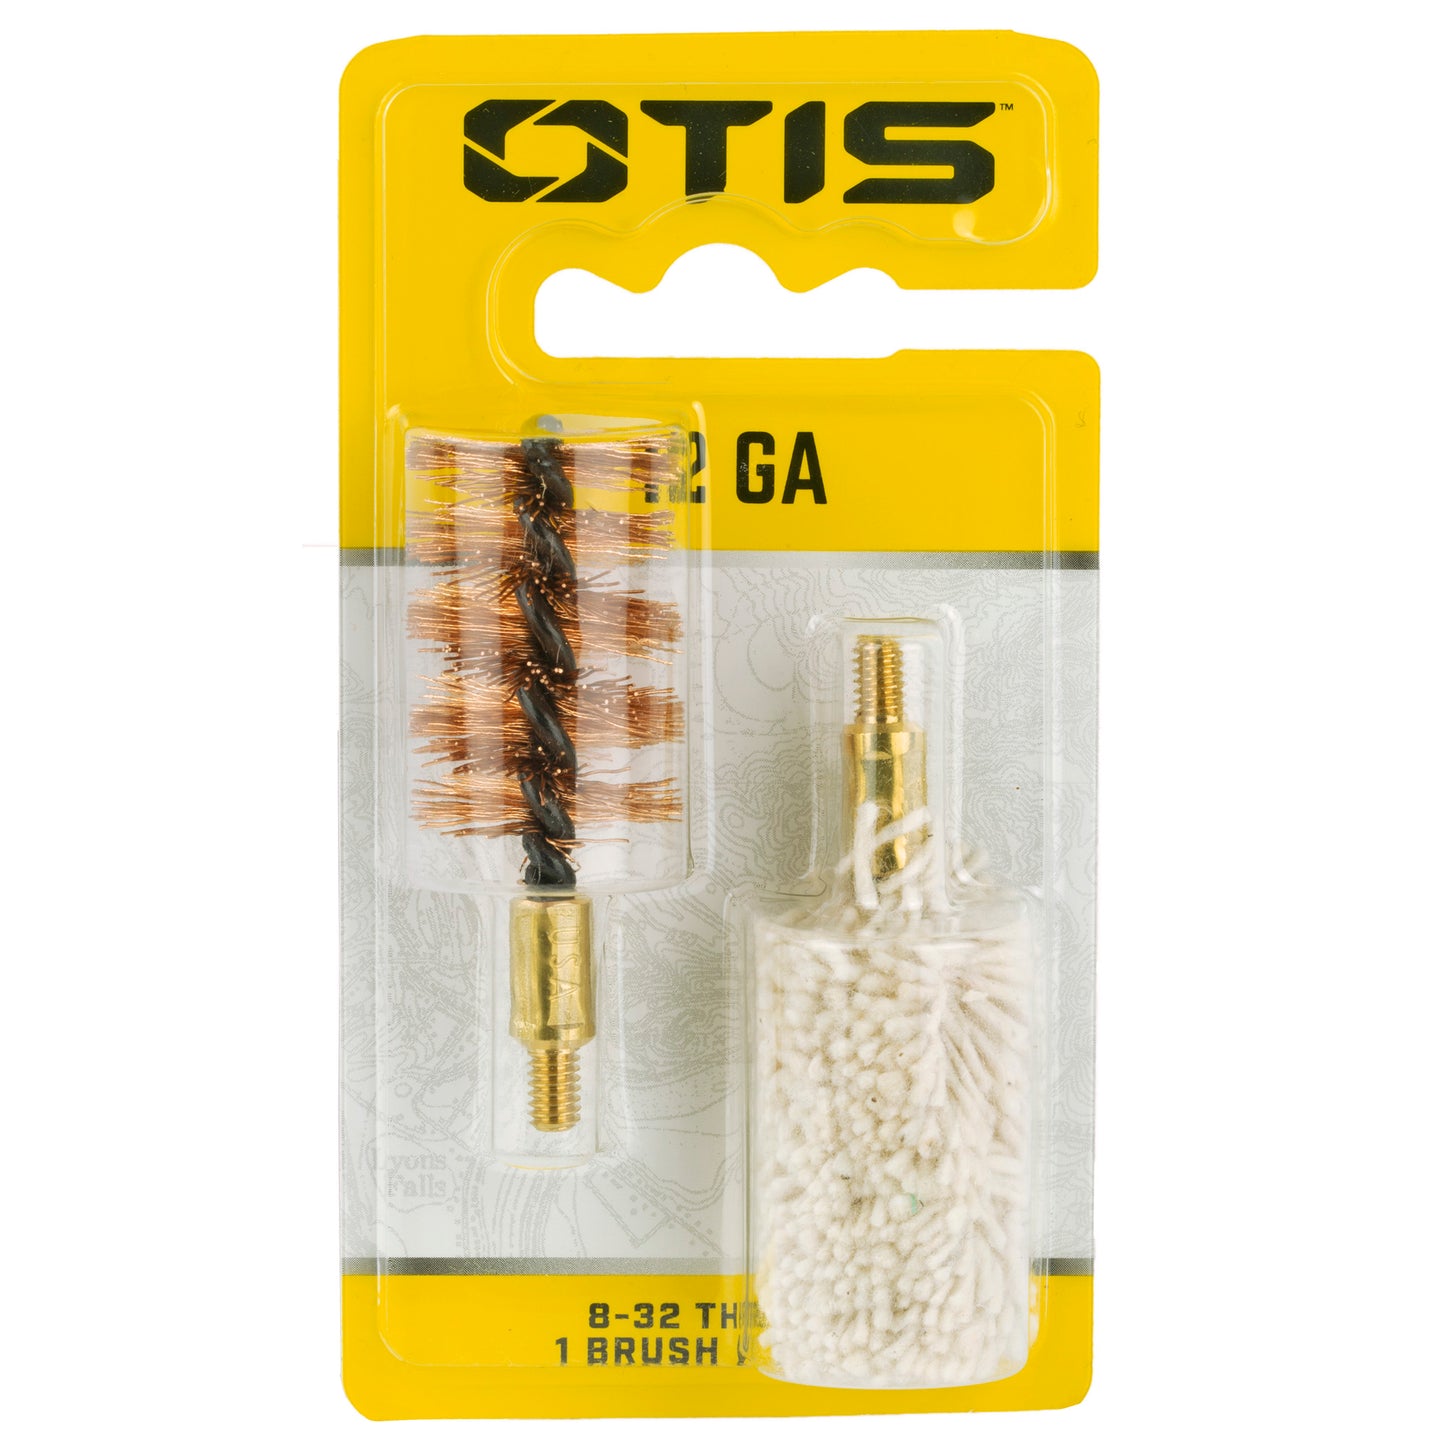 Otis Technology, Brush and Mop Combo Pack, For 12 Gauge, Includes 1 Brush and 1 Mop